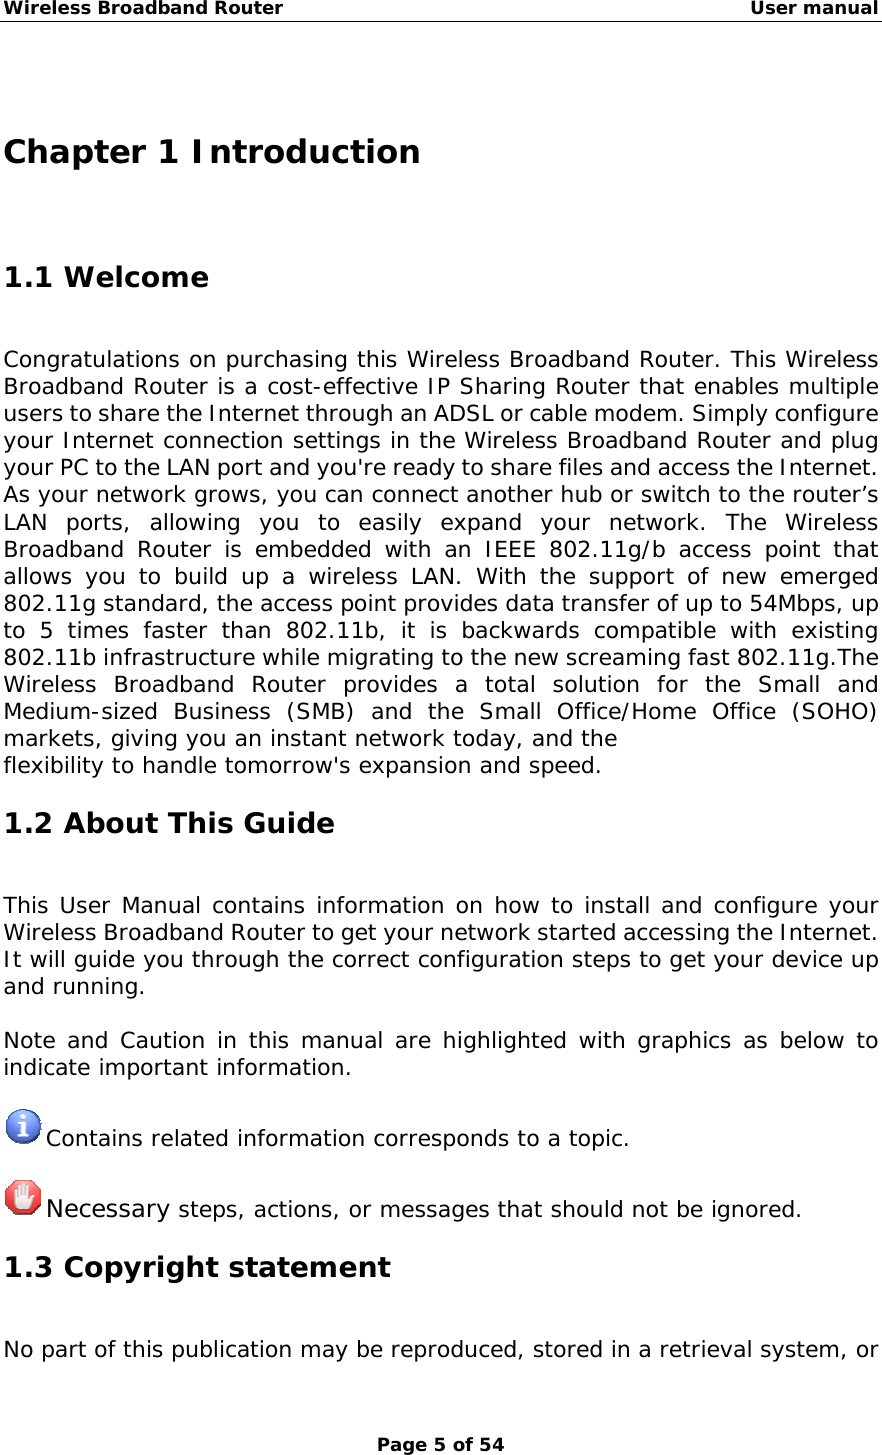 Wireless Broadband Router                                                   User manual Page 5 of 54  Chapter 1 Introduction 1.1 Welcome Congratulations on purchasing this Wireless Broadband Router. This Wireless Broadband Router is a cost-effective IP Sharing Router that enables multiple users to share the Internet through an ADSL or cable modem. Simply configure your Internet connection settings in the Wireless Broadband Router and plug your PC to the LAN port and you&apos;re ready to share files and access the Internet. As your network grows, you can connect another hub or switch to the router’s LAN ports, allowing you to easily expand your network. The Wireless Broadband Router is embedded with an IEEE 802.11g/b access point that allows you to build up a wireless LAN. With the support of new emerged 802.11g standard, the access point provides data transfer of up to 54Mbps, up to 5 times faster than 802.11b, it is backwards compatible with existing 802.11b infrastructure while migrating to the new screaming fast 802.11g.The Wireless Broadband Router provides a total solution for the Small and Medium-sized Business (SMB) and the Small Office/Home Office (SOHO) markets, giving you an instant network today, and the flexibility to handle tomorrow&apos;s expansion and speed. 1.2 About This Guide This User Manual contains information on how to install and configure your Wireless Broadband Router to get your network started accessing the Internet. It will guide you through the correct configuration steps to get your device up and running.  Note and Caution in this manual are highlighted with graphics as below to indicate important information.   Contains related information corresponds to a topic.   Necessary steps, actions, or messages that should not be ignored. 1.3 Copyright statement No part of this publication may be reproduced, stored in a retrieval system, or 